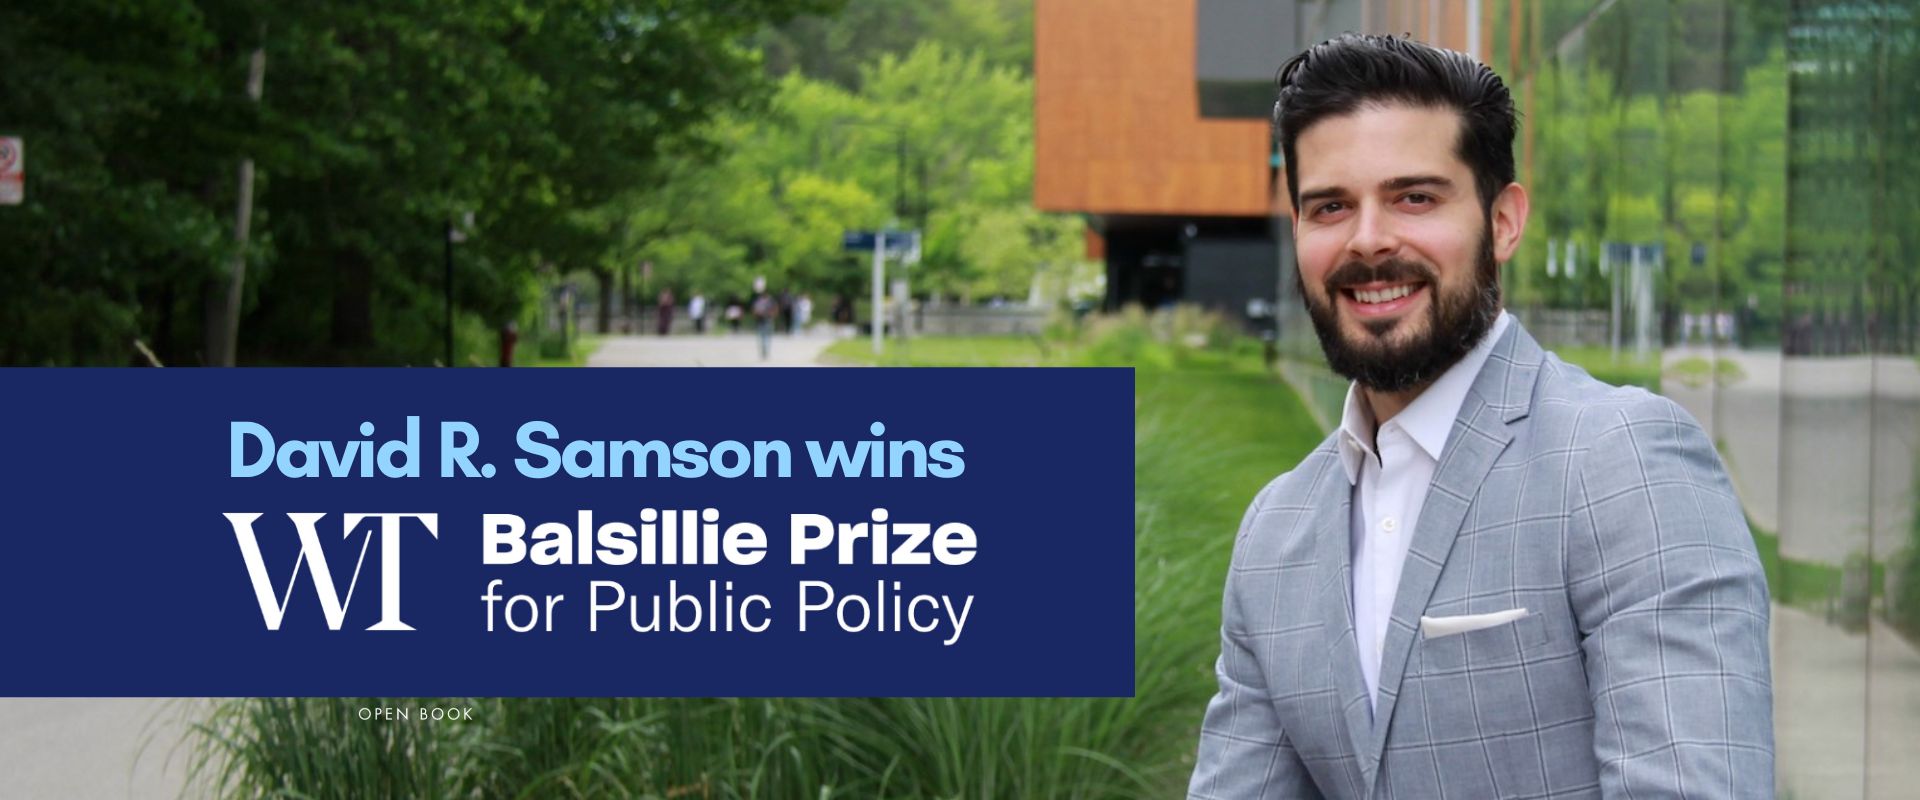 Photo of author David R. Samson pictured outside. Blue banner with white text reads David R. Samson wins WT Balsillie Prize for Public Policy